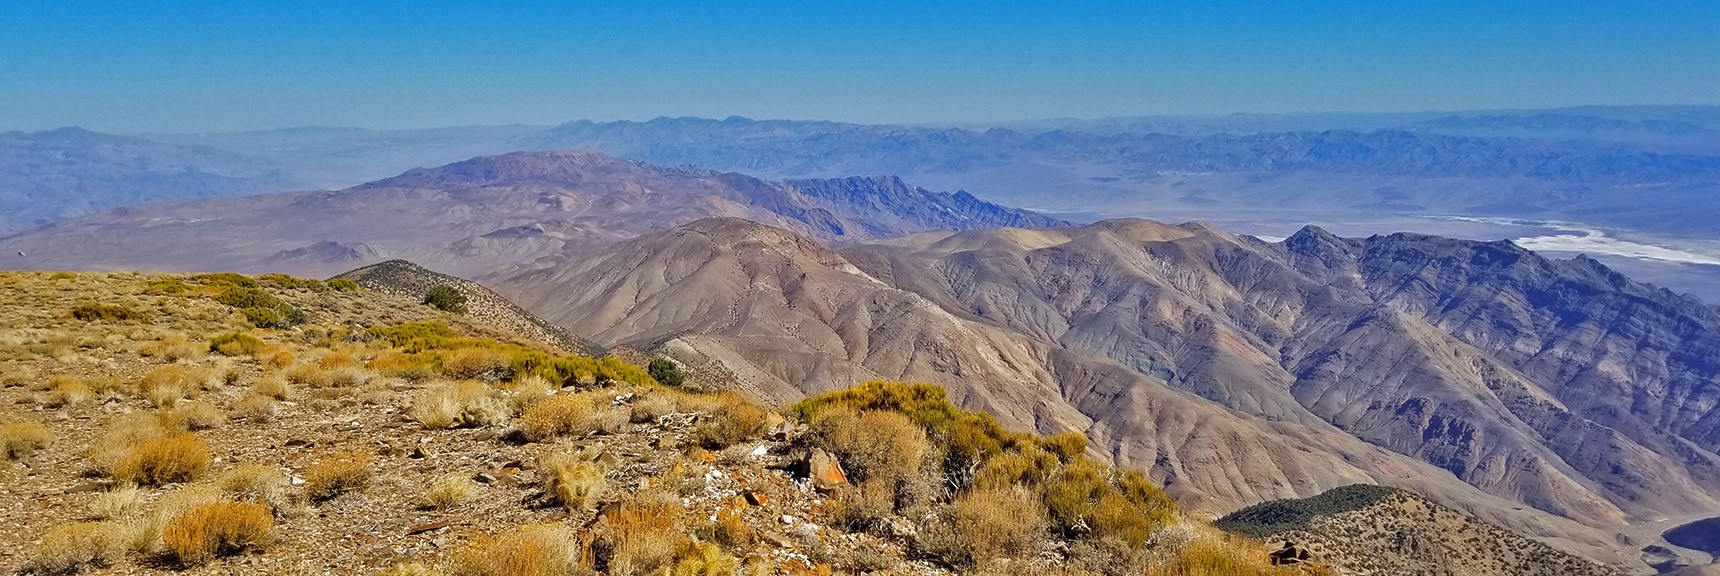 View North Toward Aguereberry Point and Northern Death Valley from Wildrose Peak Summit | Wildrose Peak | Panamint Mountain Range | Death Valley National Park, California